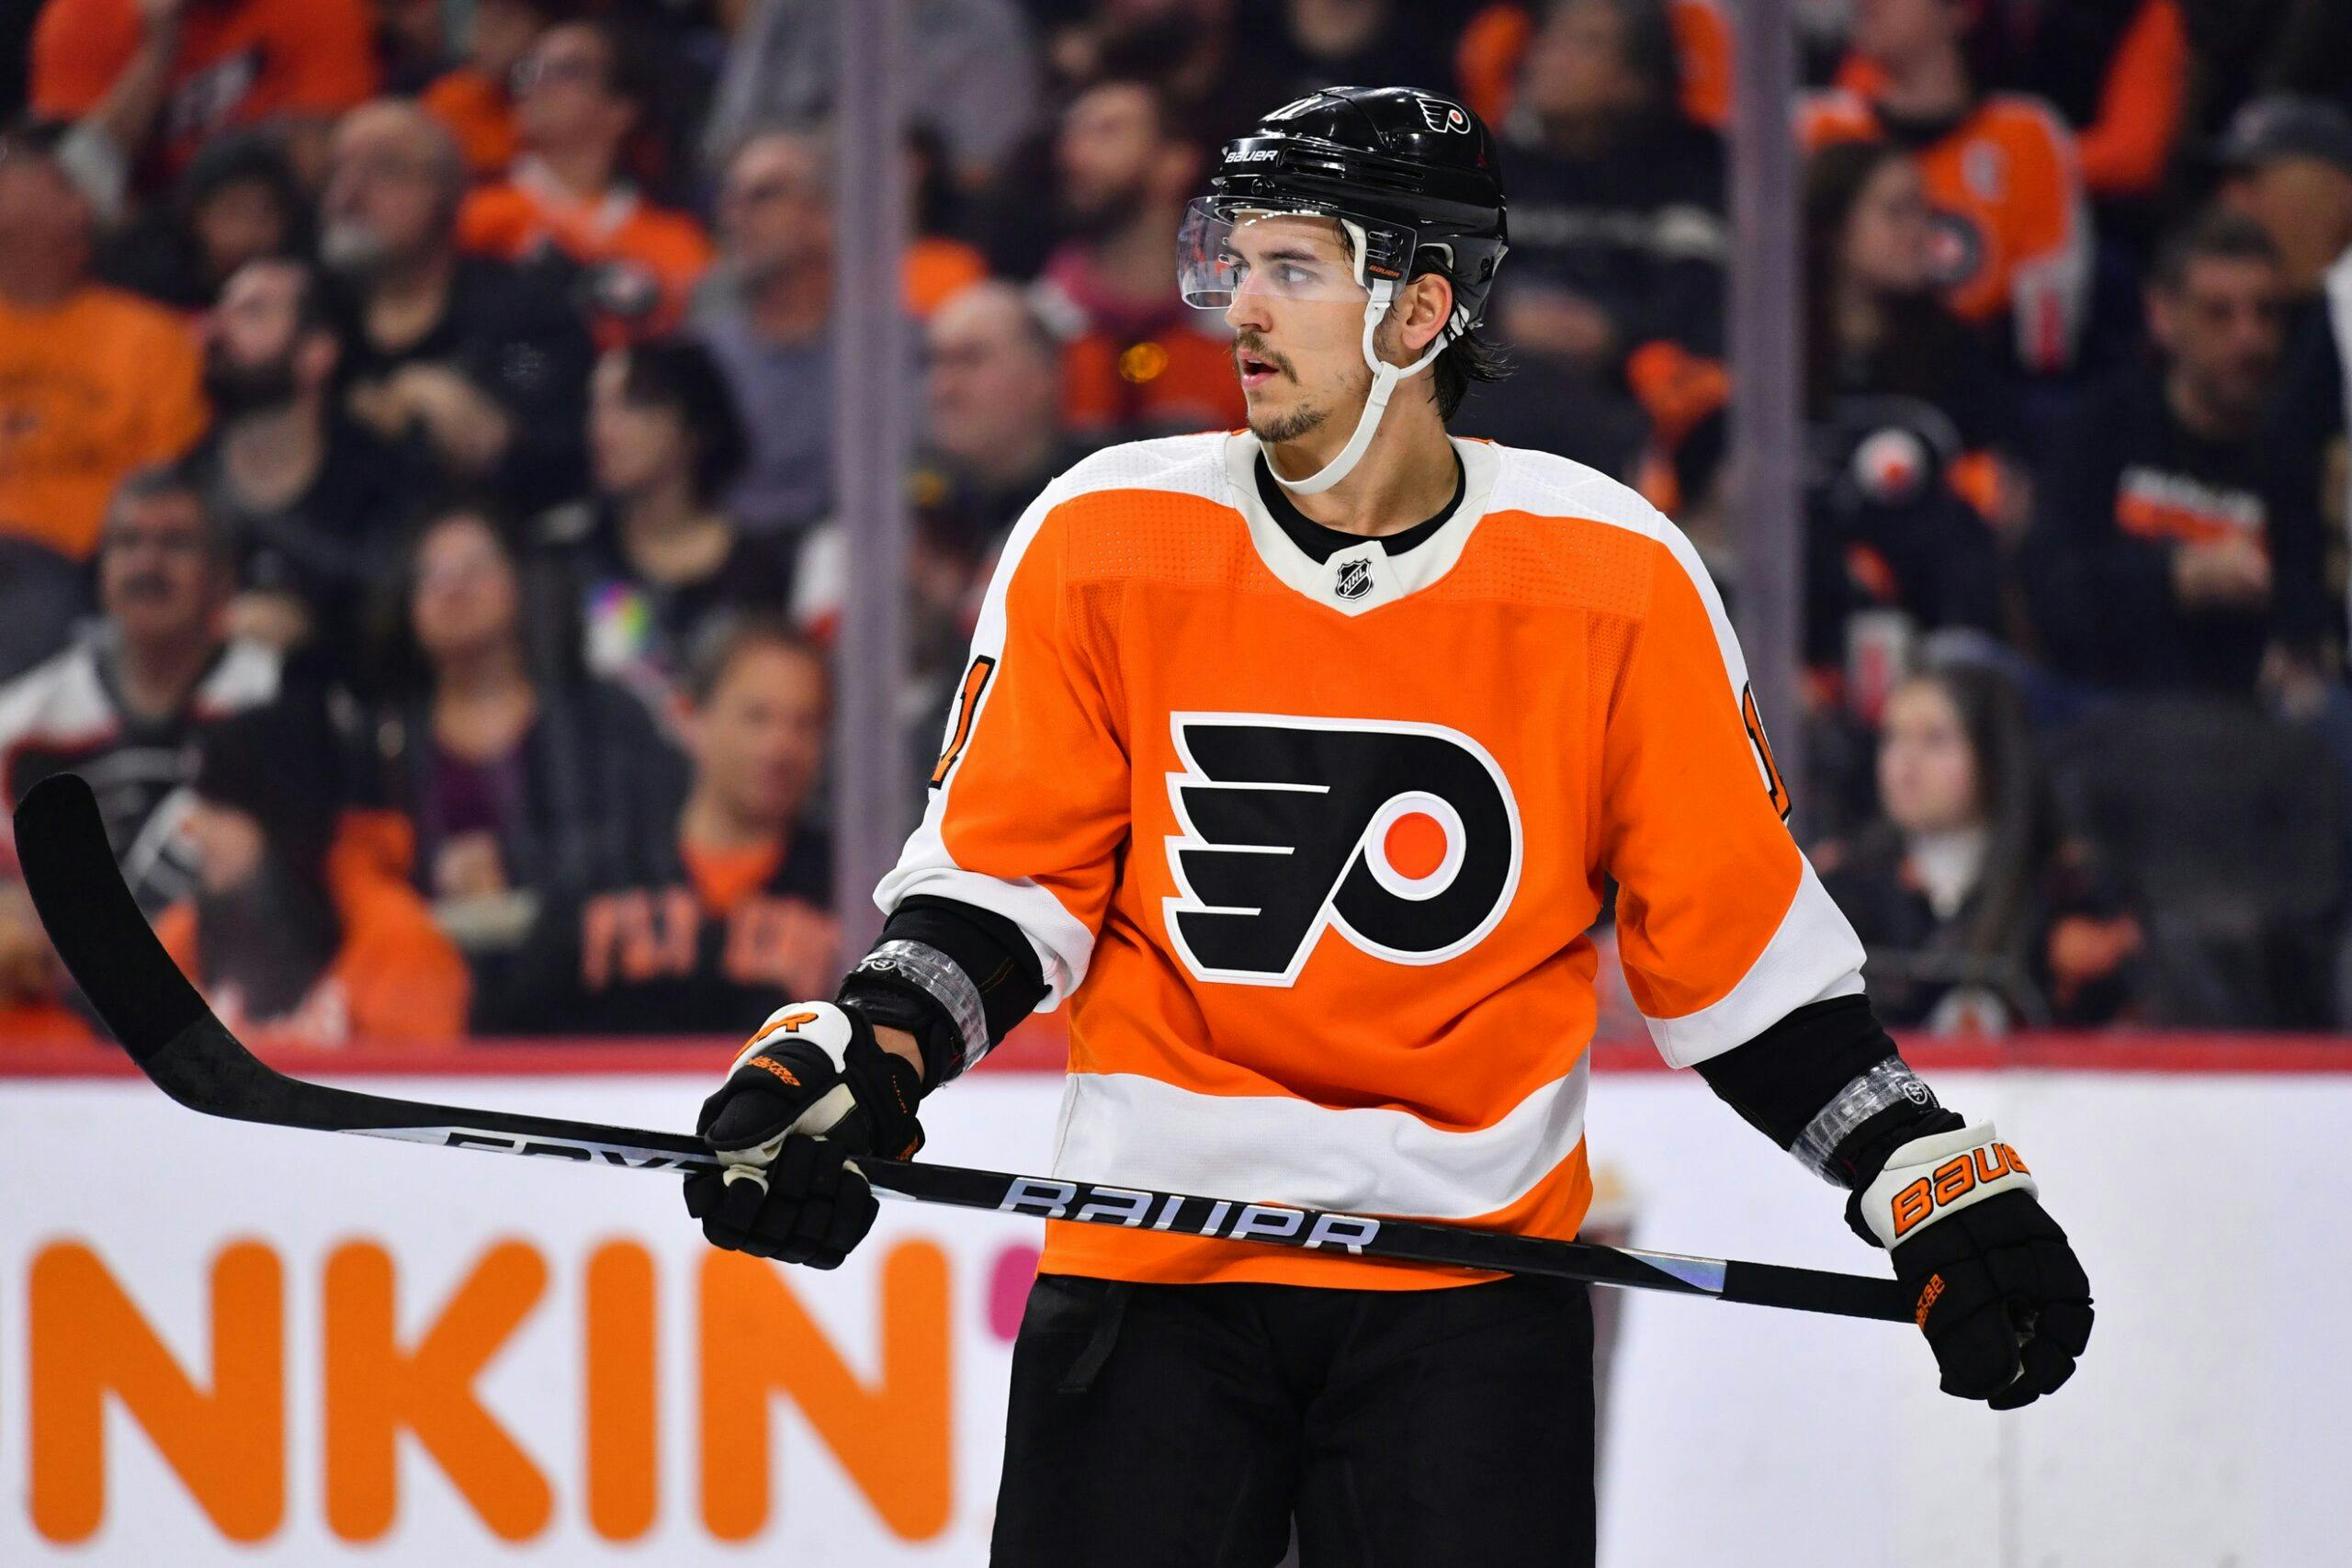 There has never been a better time for the Flyers to capitalize on Konecny’s trade value